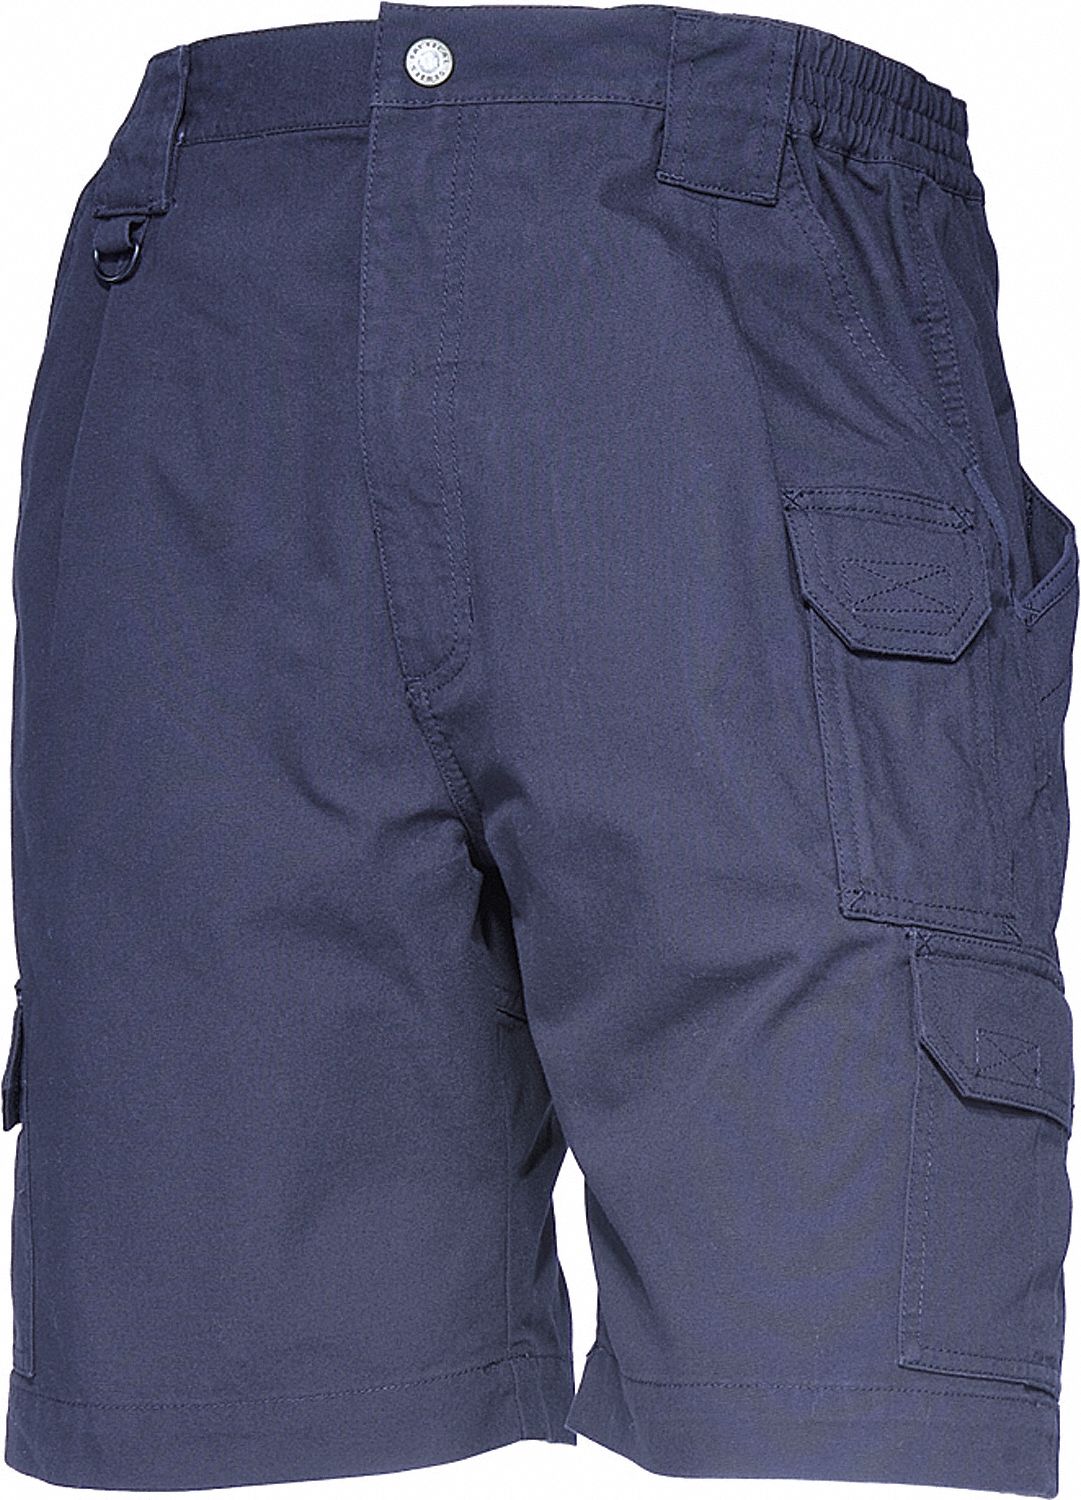 5.11 TACTICAL, 32 in, 32 in Fits Waist Size, Taclite Shorts - 6UWJ8 ...